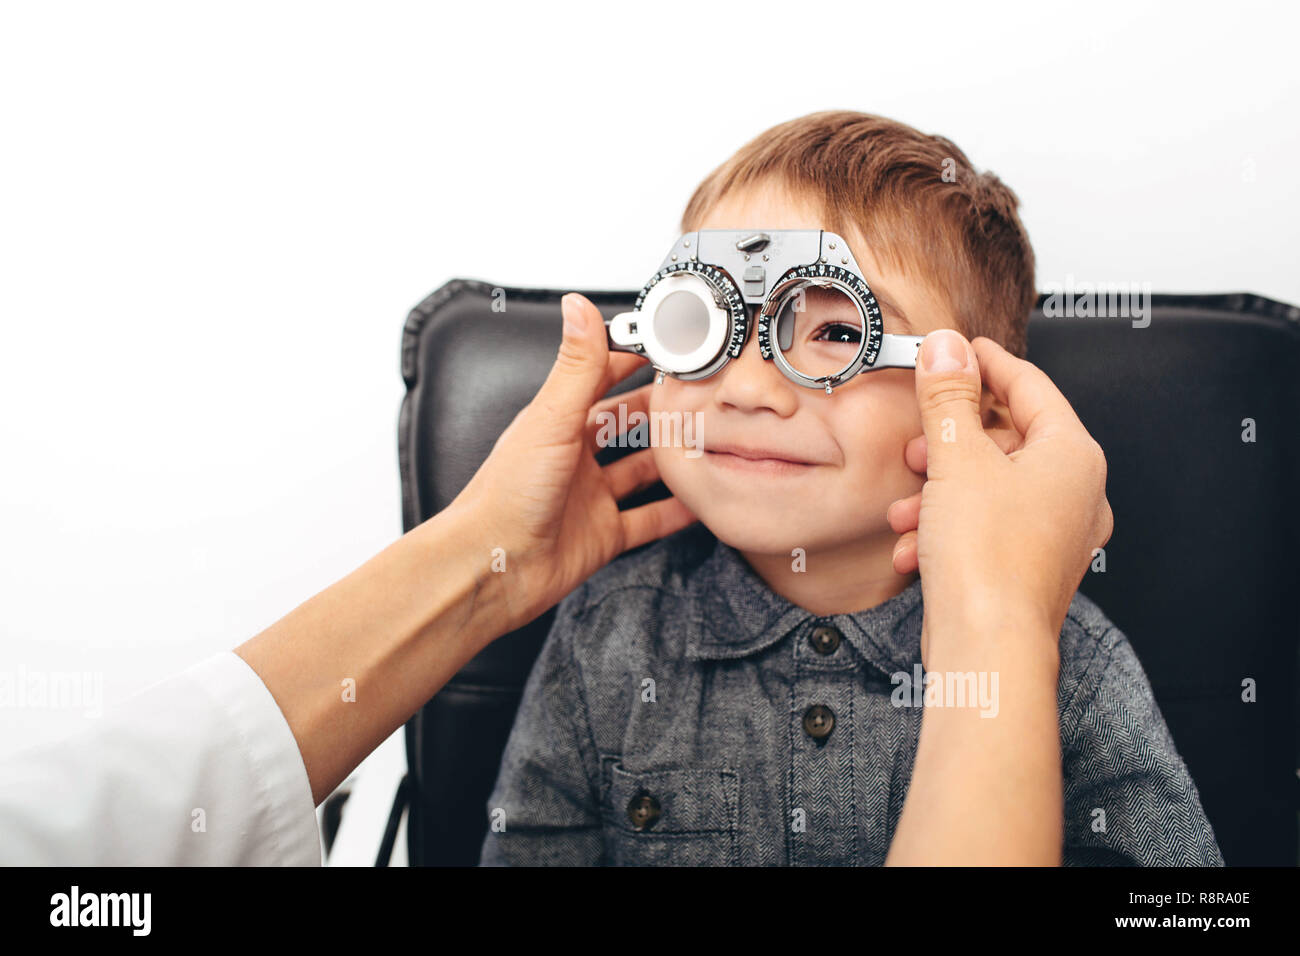 optometrist checking vision of a little cheerful boy using trial frame Stock Photo